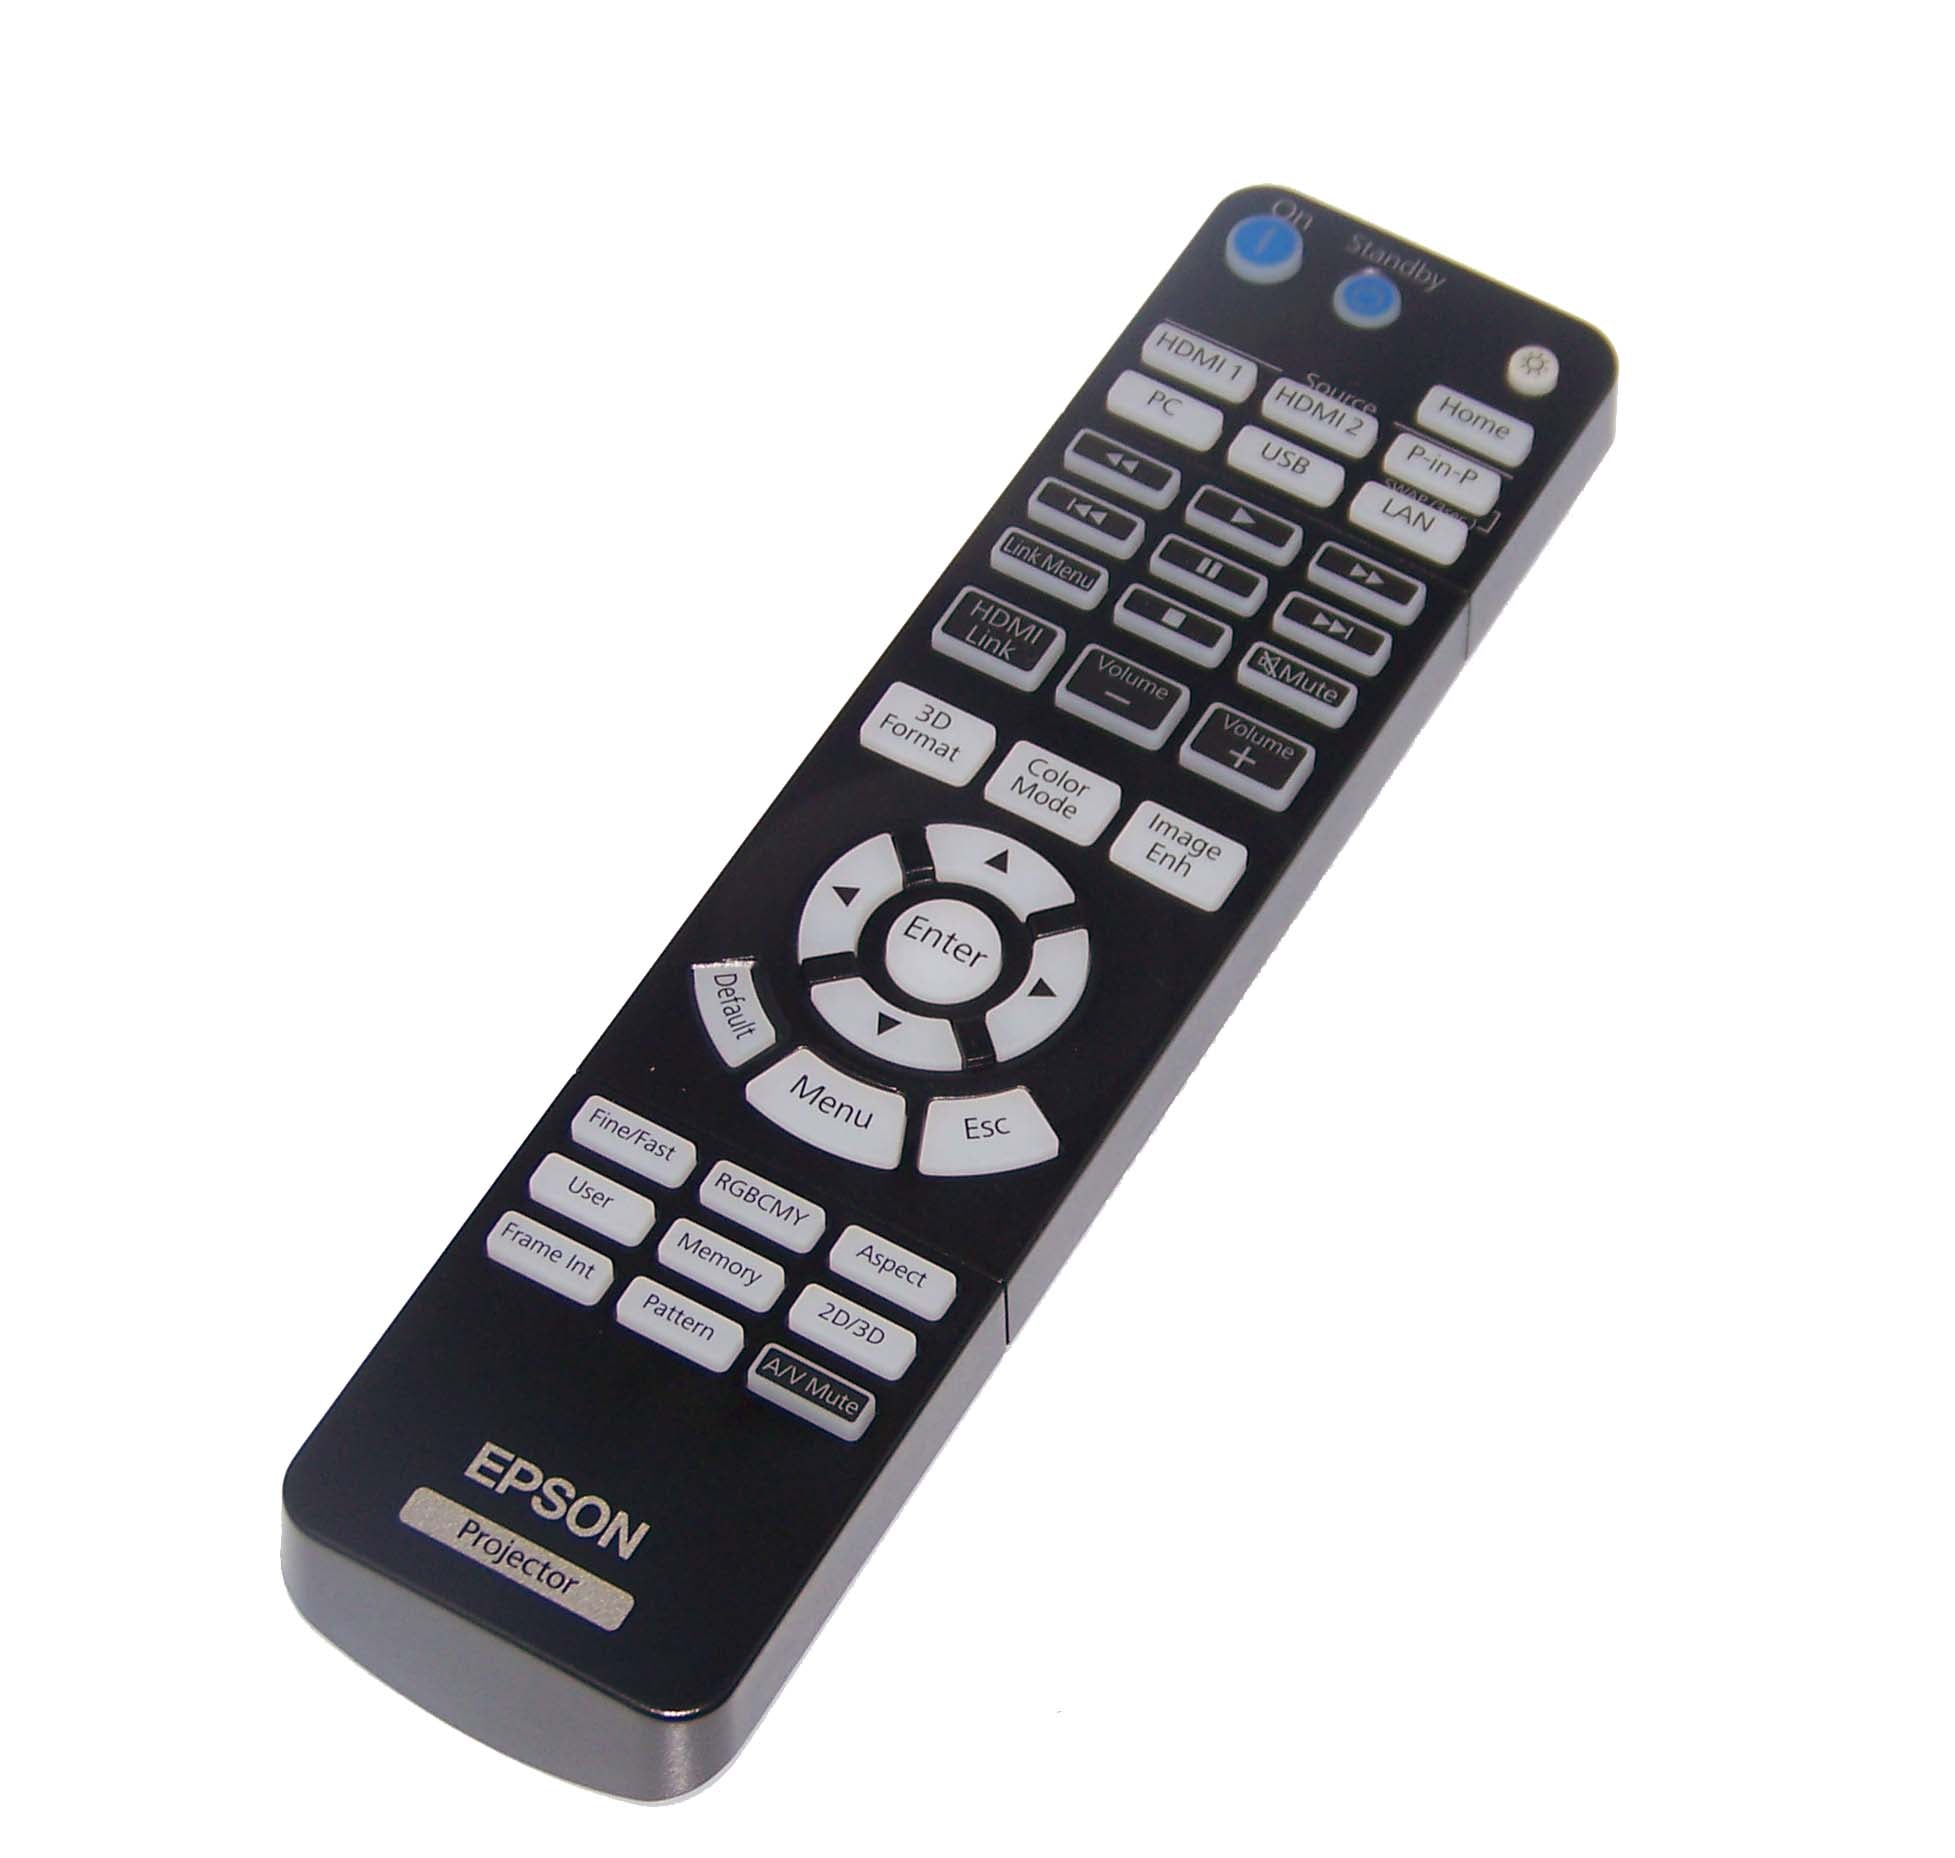 Epson Projector Remote Control For EH-TW6800, EH-TW6700, EH-TW6700W, EH-TW6300